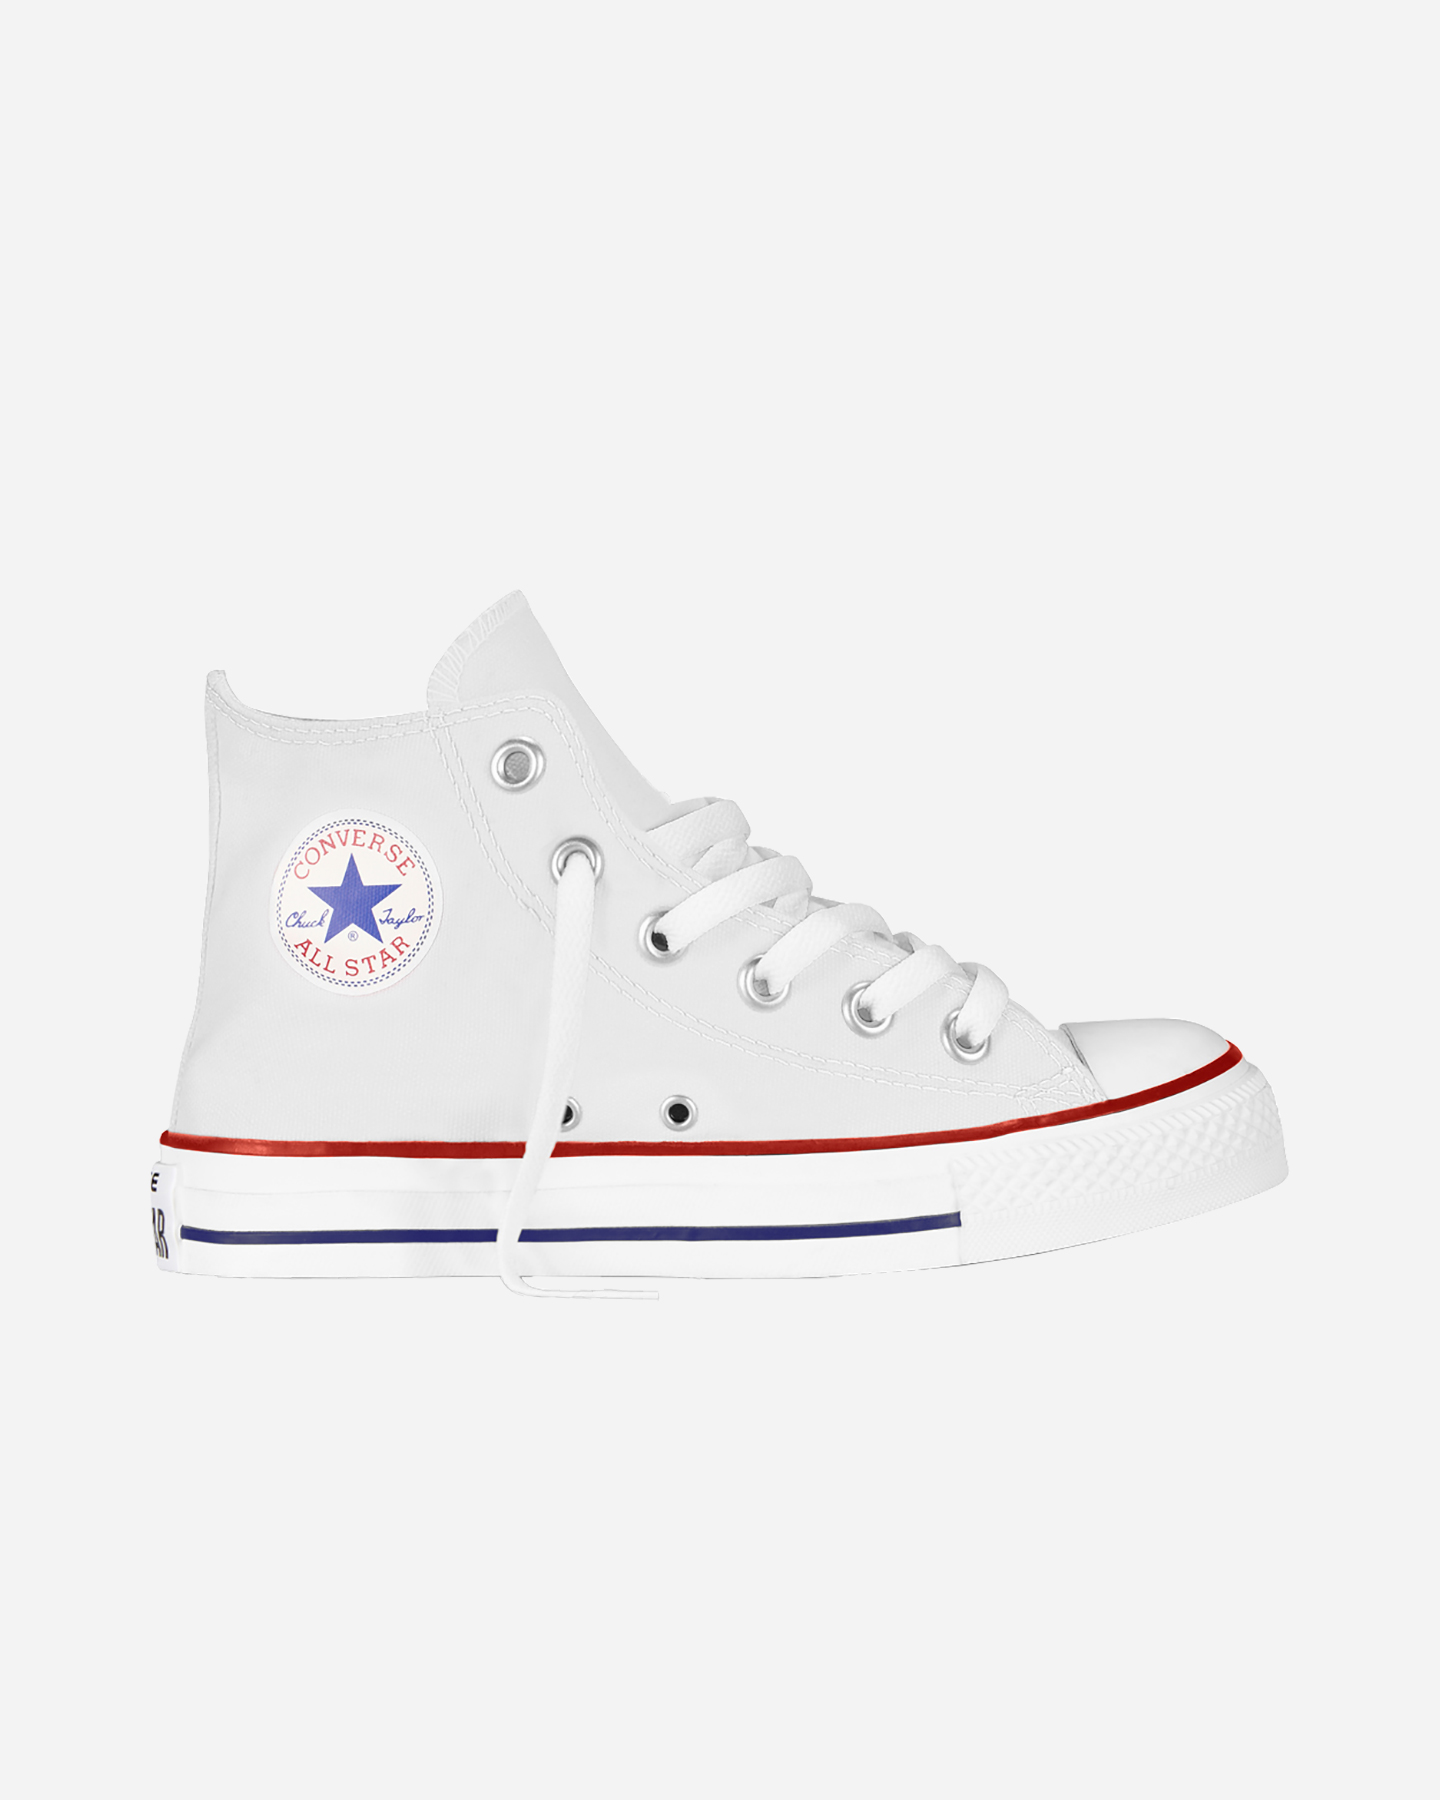 Image of Converse All Star High Ps Jr - Scarpe Sportive